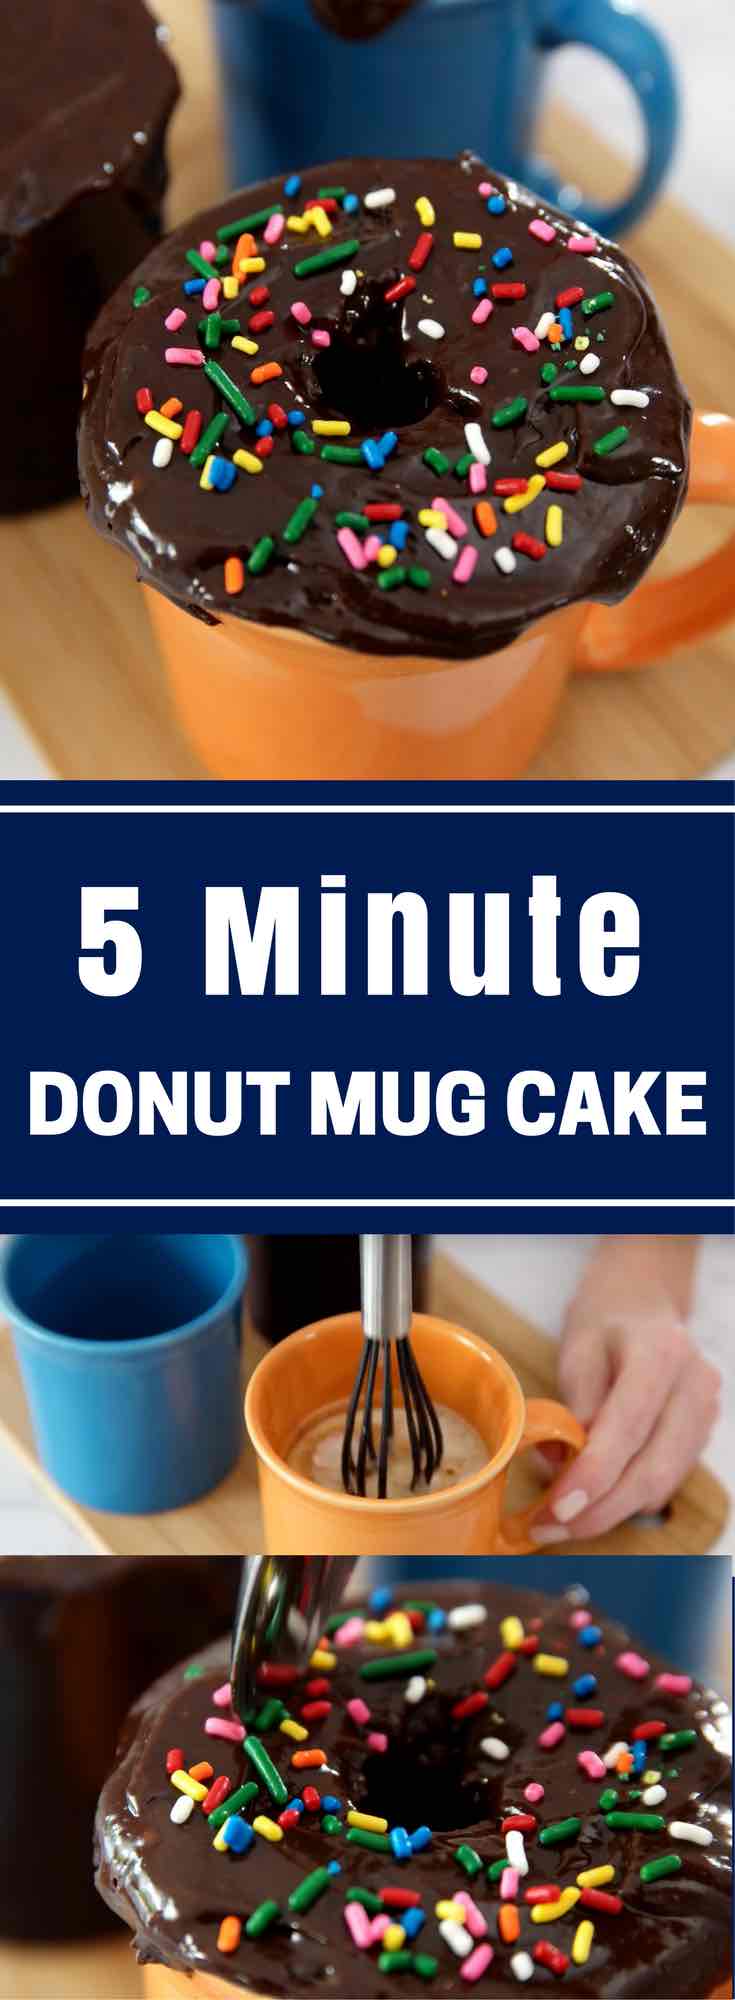 5 Minute Donut Mug Cake – A creamy, fluffy, delicious cake in a mug, ready in 5 minutes. It only requires a few simple ingredients: flour, sugar, baking powder, oil, milk, vanilla, chocolate chips, cream and nutmeg. So good and easy to make for the perfect dessert or snack. No bake. Vegetarian. Video recipe. | tipbuzz.com